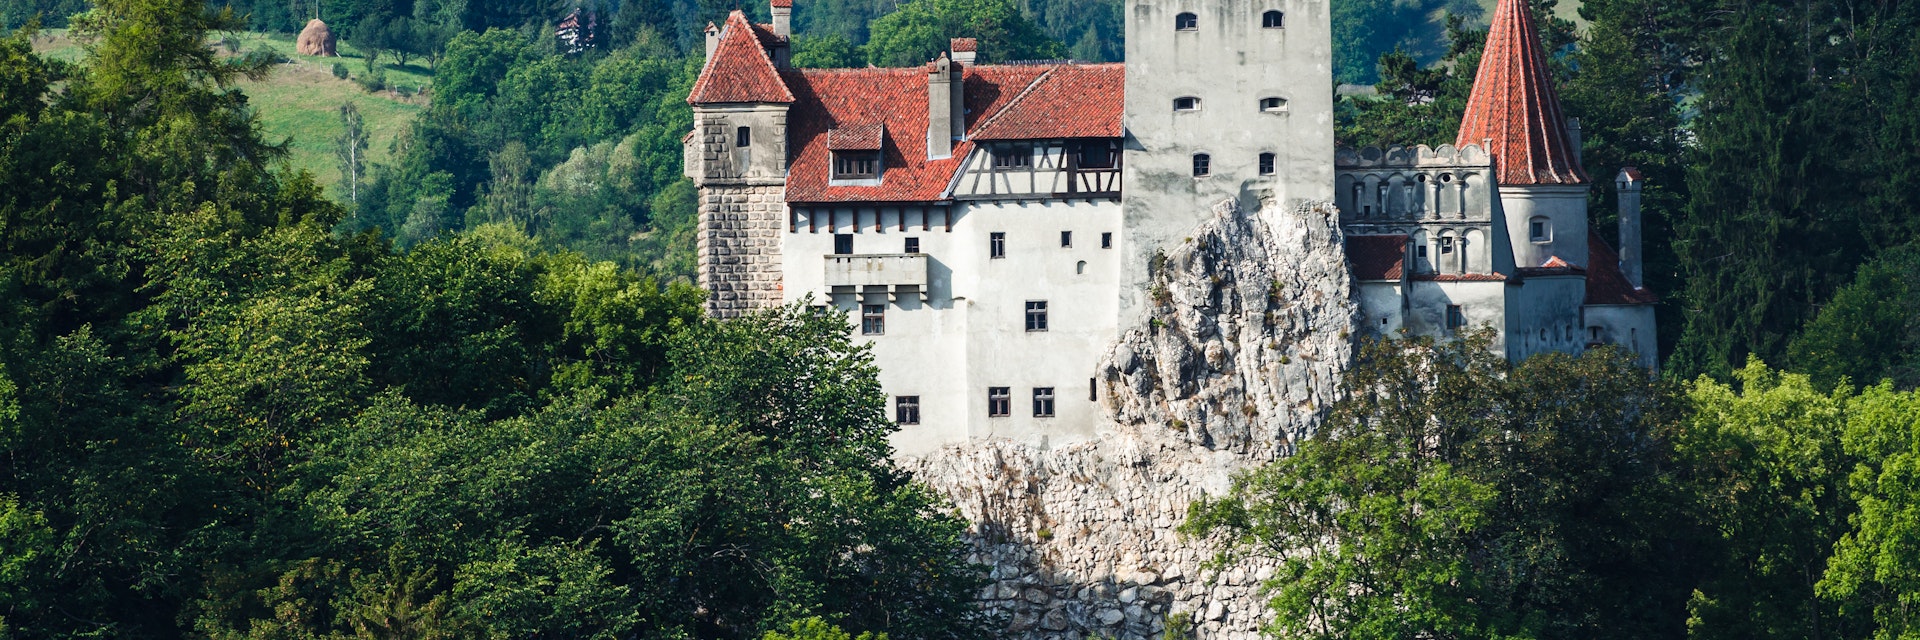 The medieval Castle of Bran. The castle  guarded in the past the border between Transylvania an Wallachia. It is also known for the myth of Dracula.; Shutterstock ID 114267793; Your name (First / Last): Josh Vogel; Project no. or GL code: 56530; Network activity no. or Cost Centre: Online-Design; Product or Project: 65050/7529/Josh Vogel/LP.com Destination Galleries